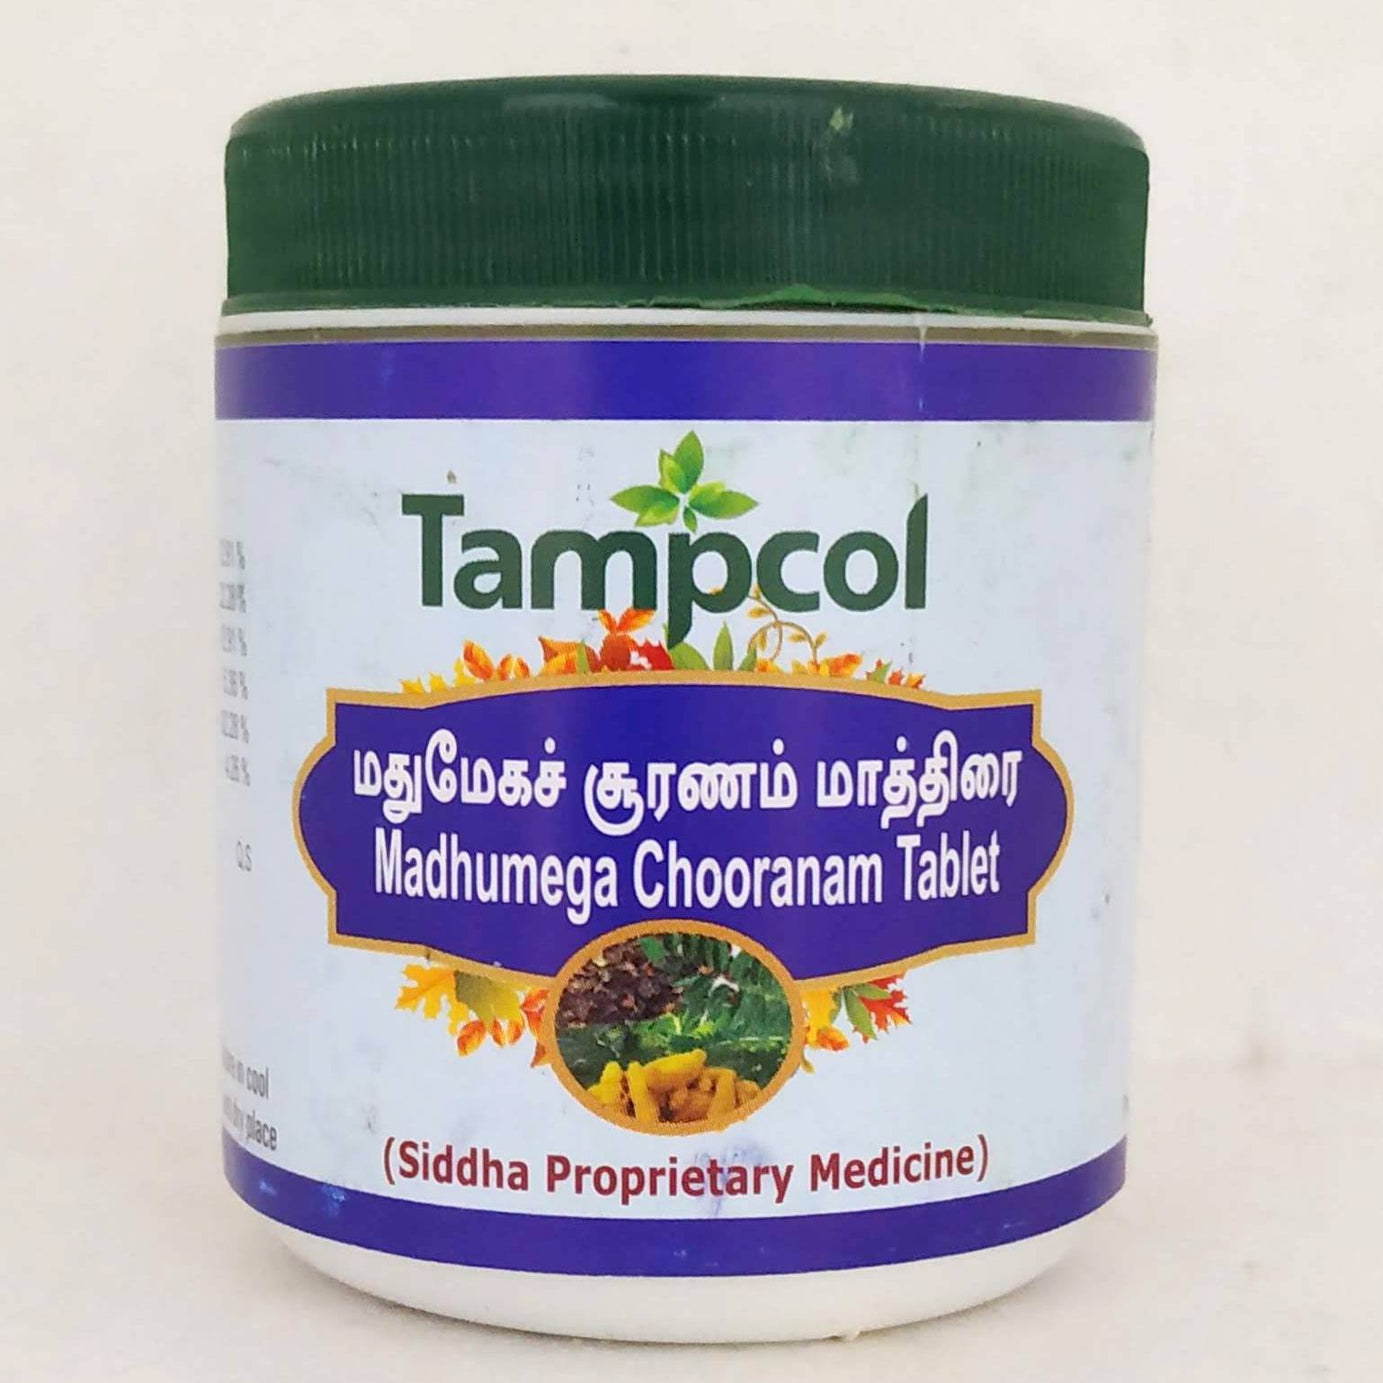 Shop Tampcol Madhumega Chooranam Tablet - 100Tablets at price 72.00 from Tampcol Online - Ayush Care